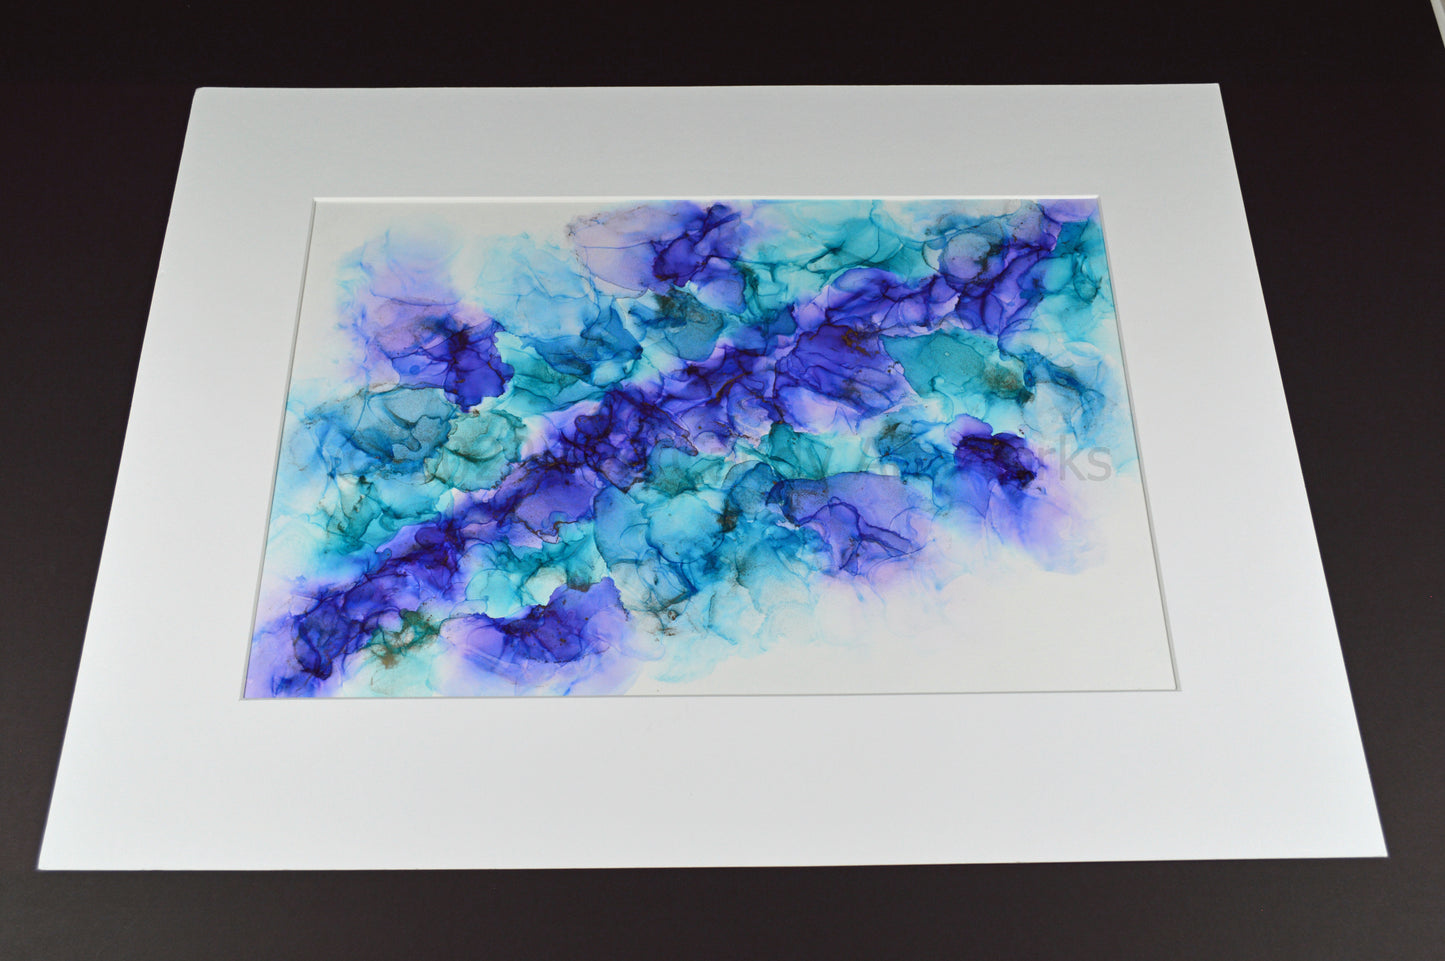 AI126 - 13x19" Alcohol Ink in 18x24" White Mat